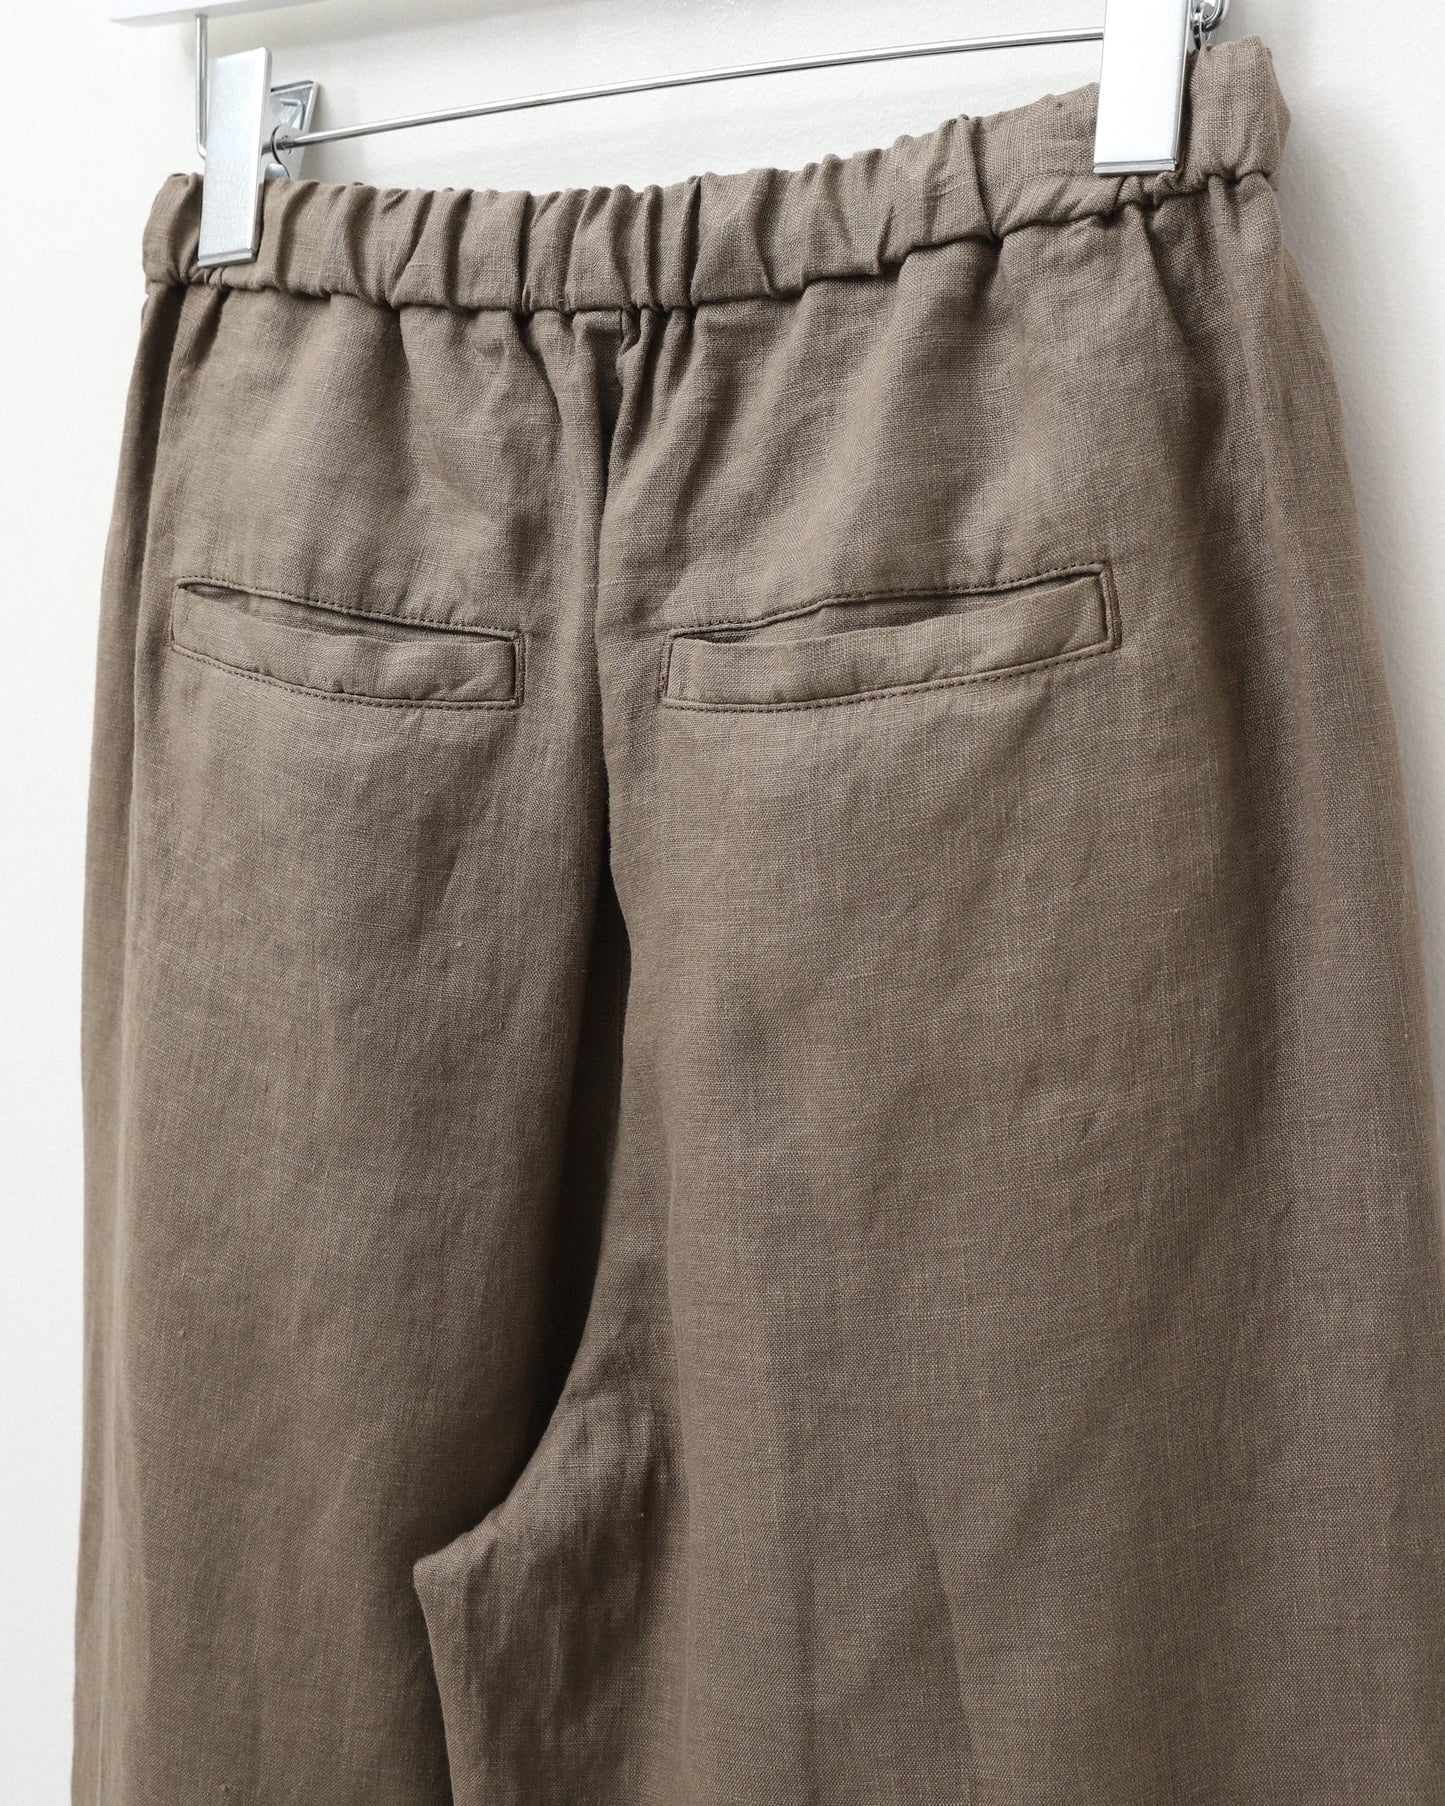 washed linen pants